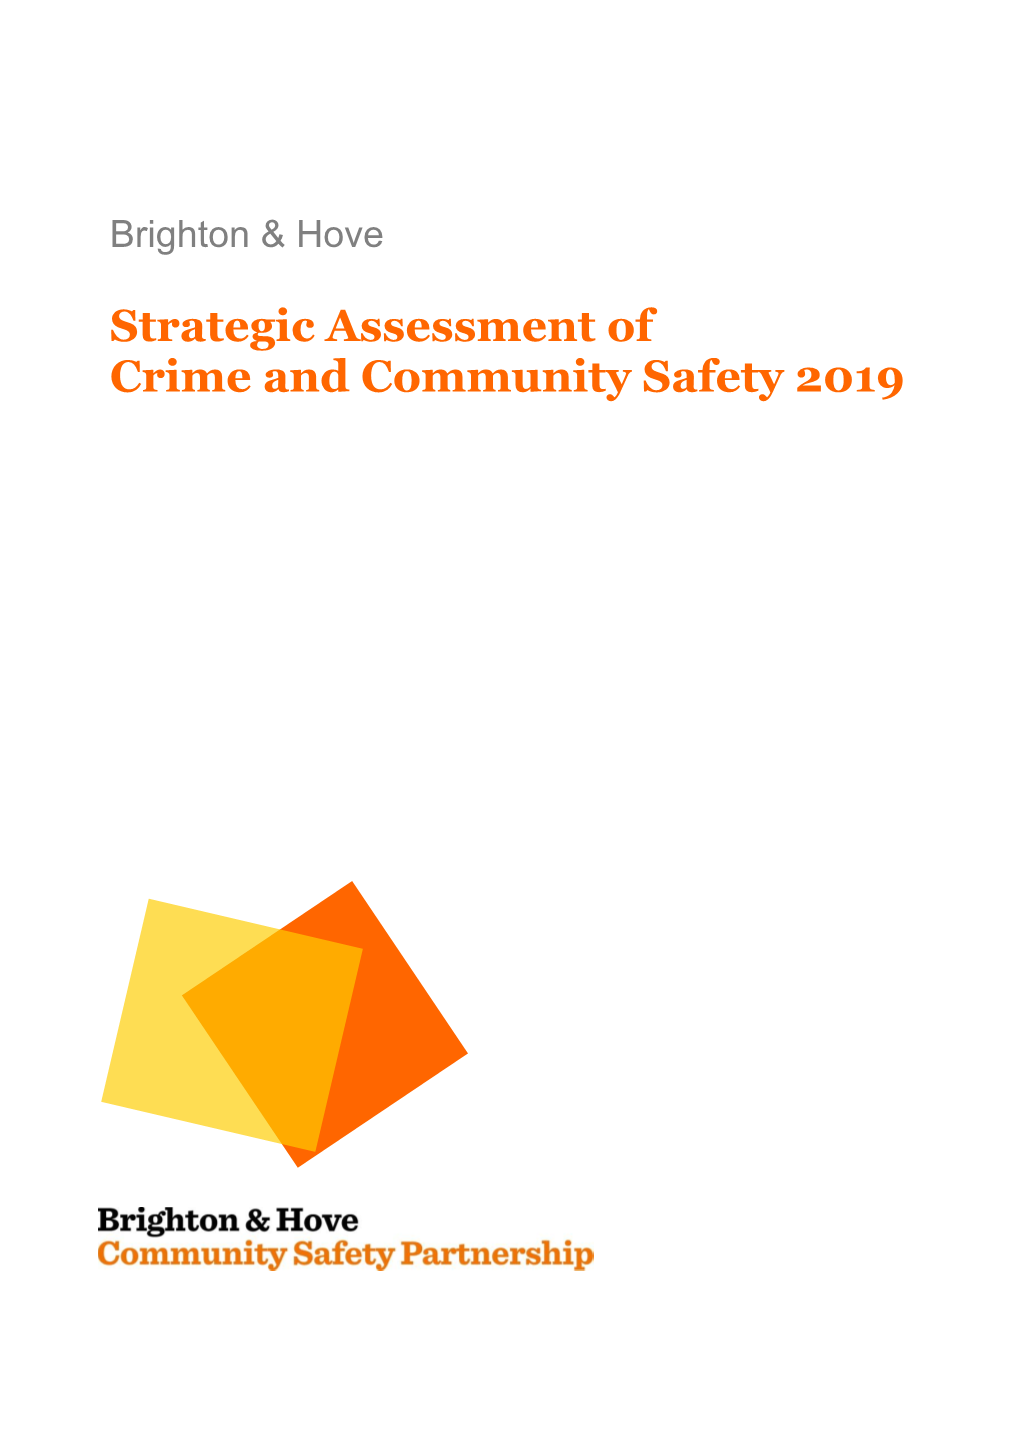 Strategic Assessment of Crime and Community Safety 2019